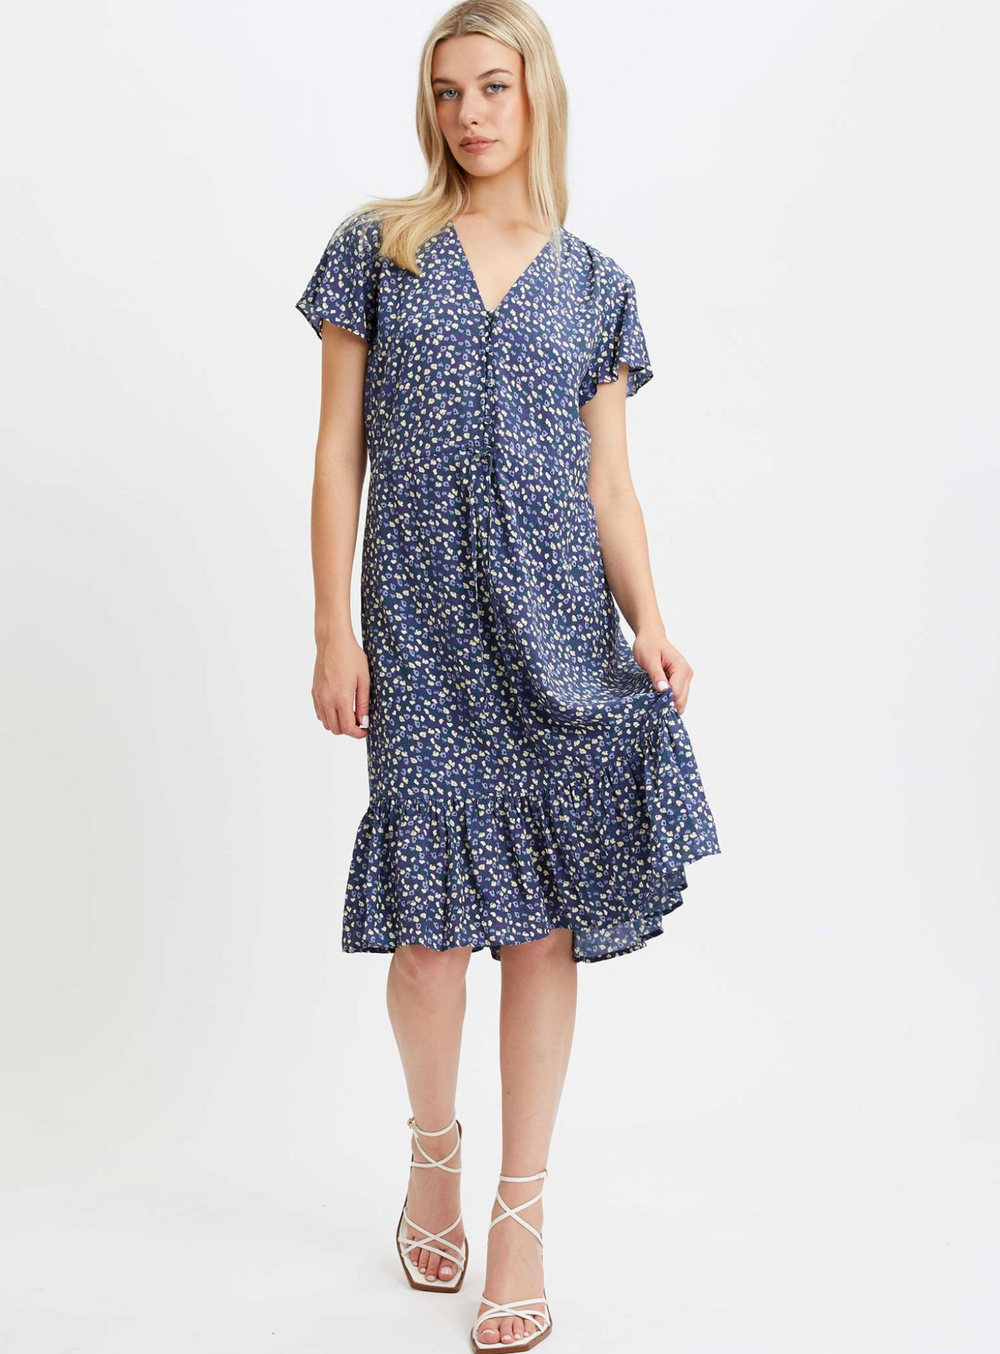 ANETRA | Knee-Length Navy Floral Dress  || ANETRA  | Robe Fleurie Marine Longueur Genou